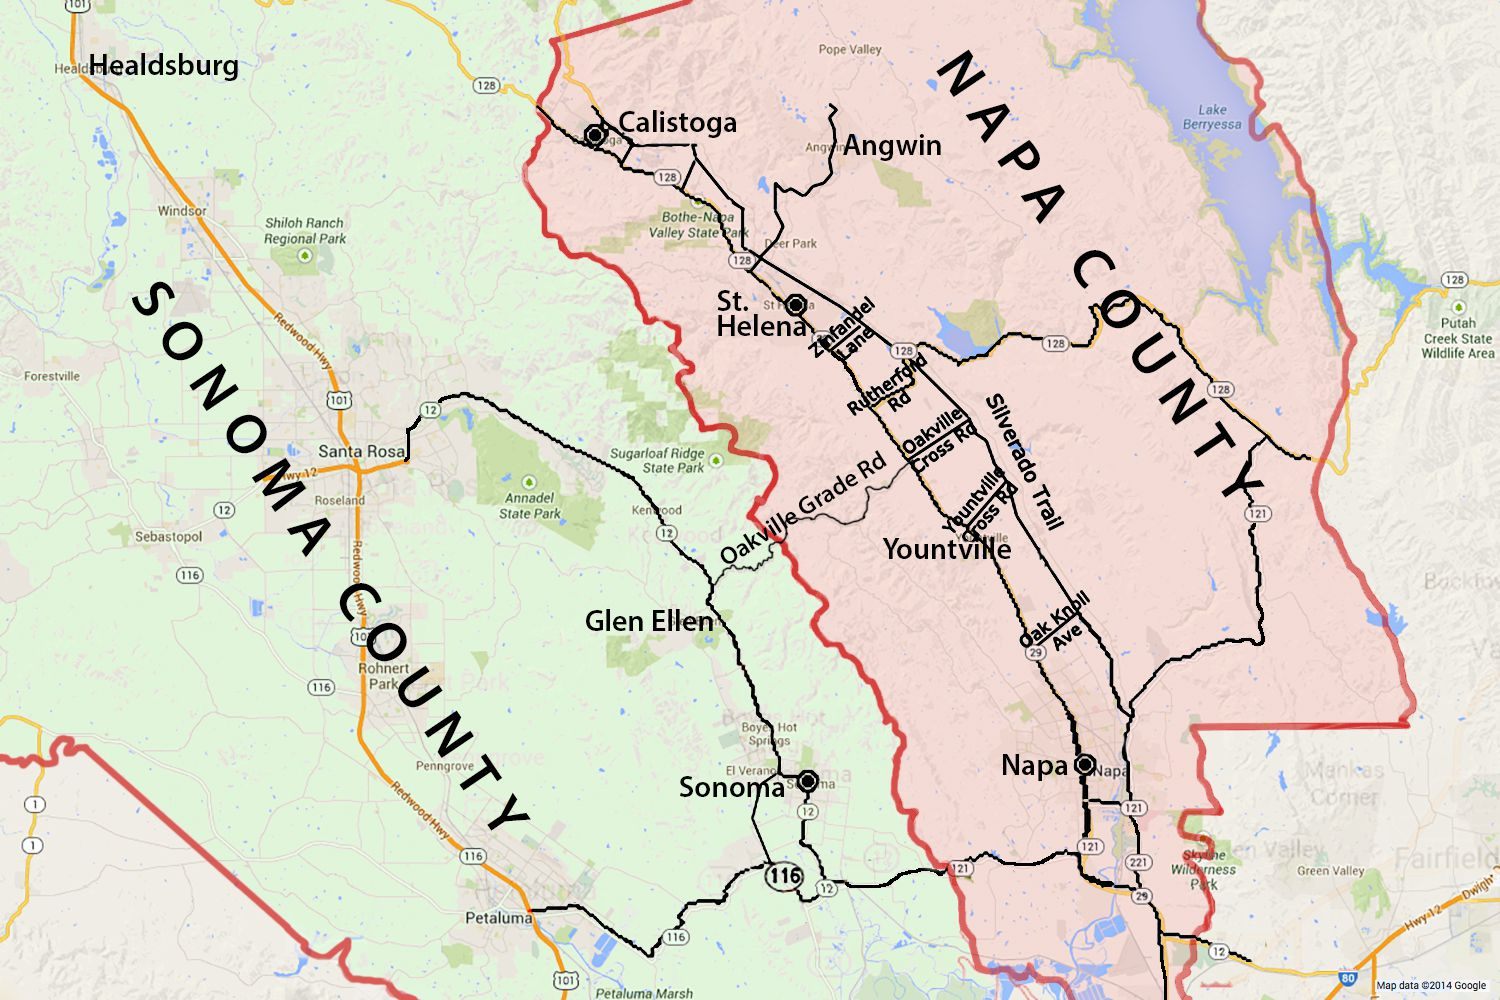 Wine Country Map: Sonoma And Napa Valley - Sonoma California Map